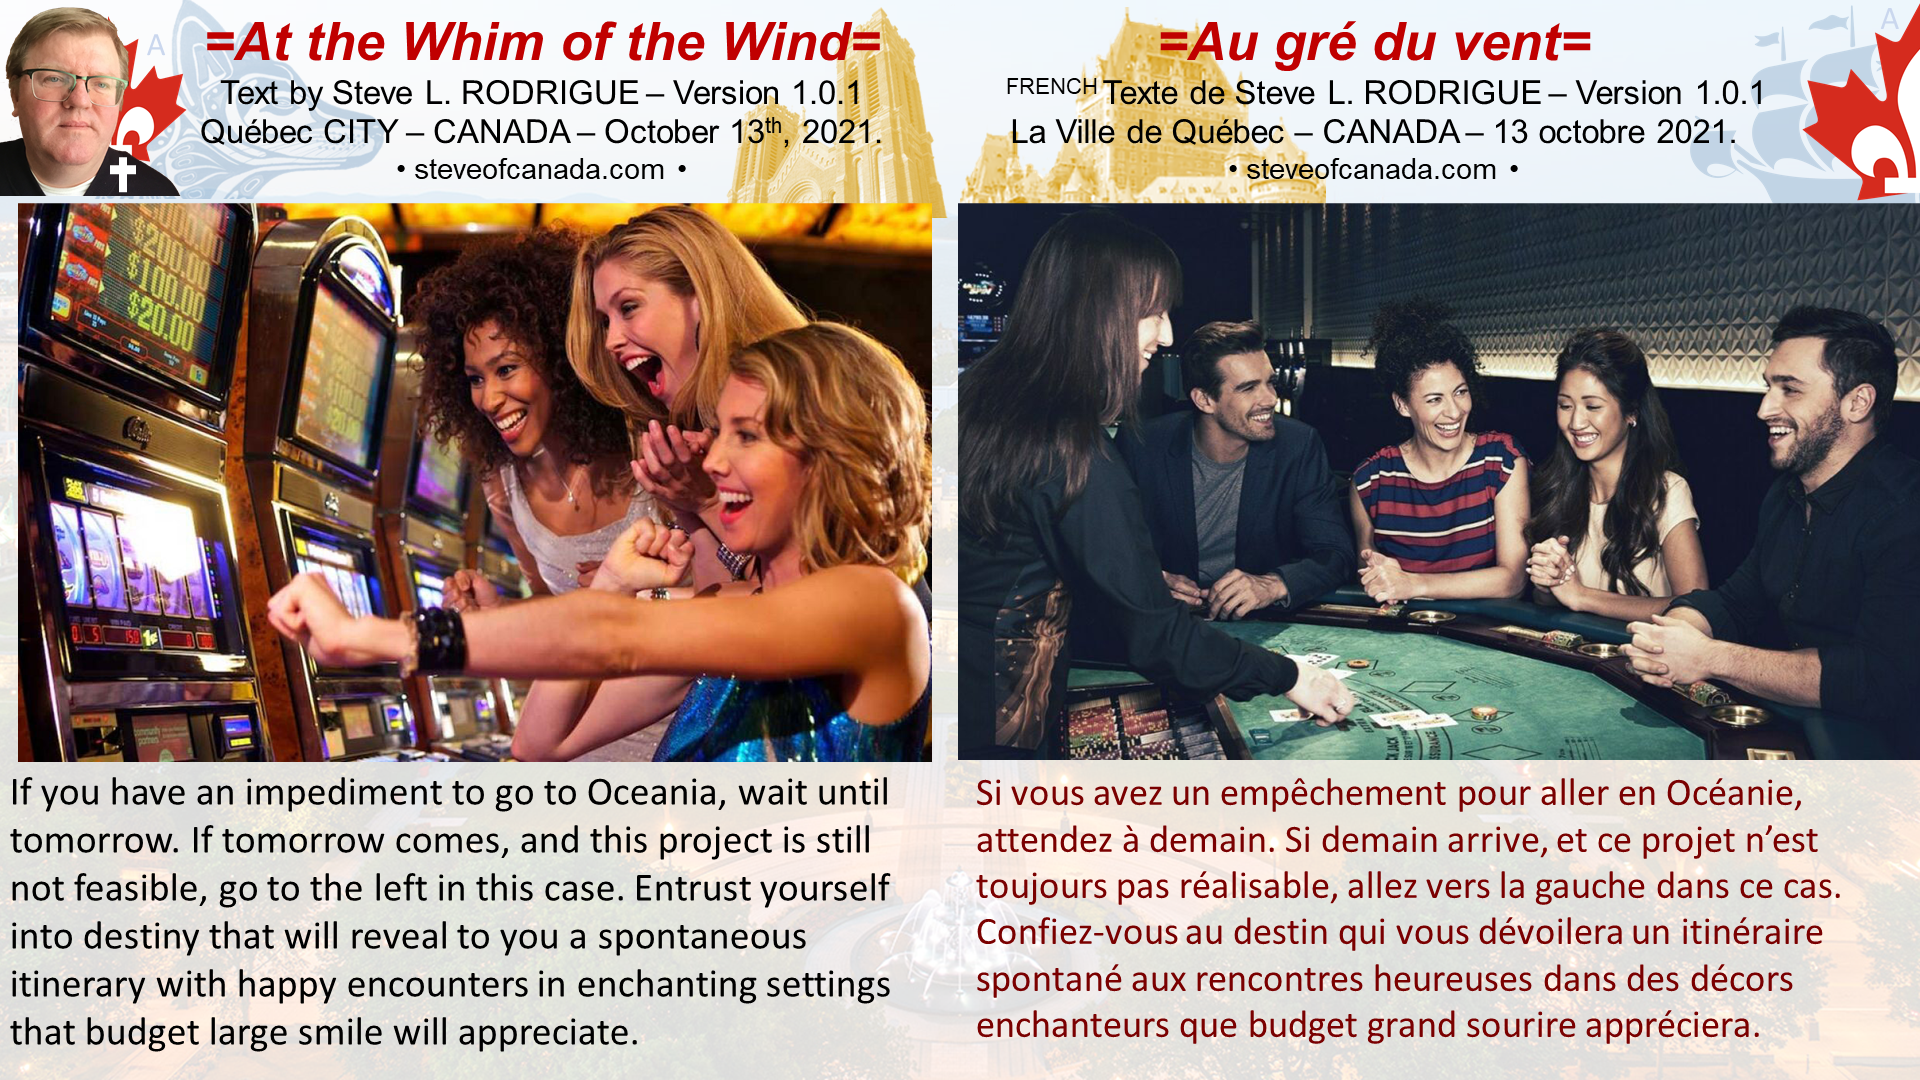 At the Whim of the Wind / Au gré du vent